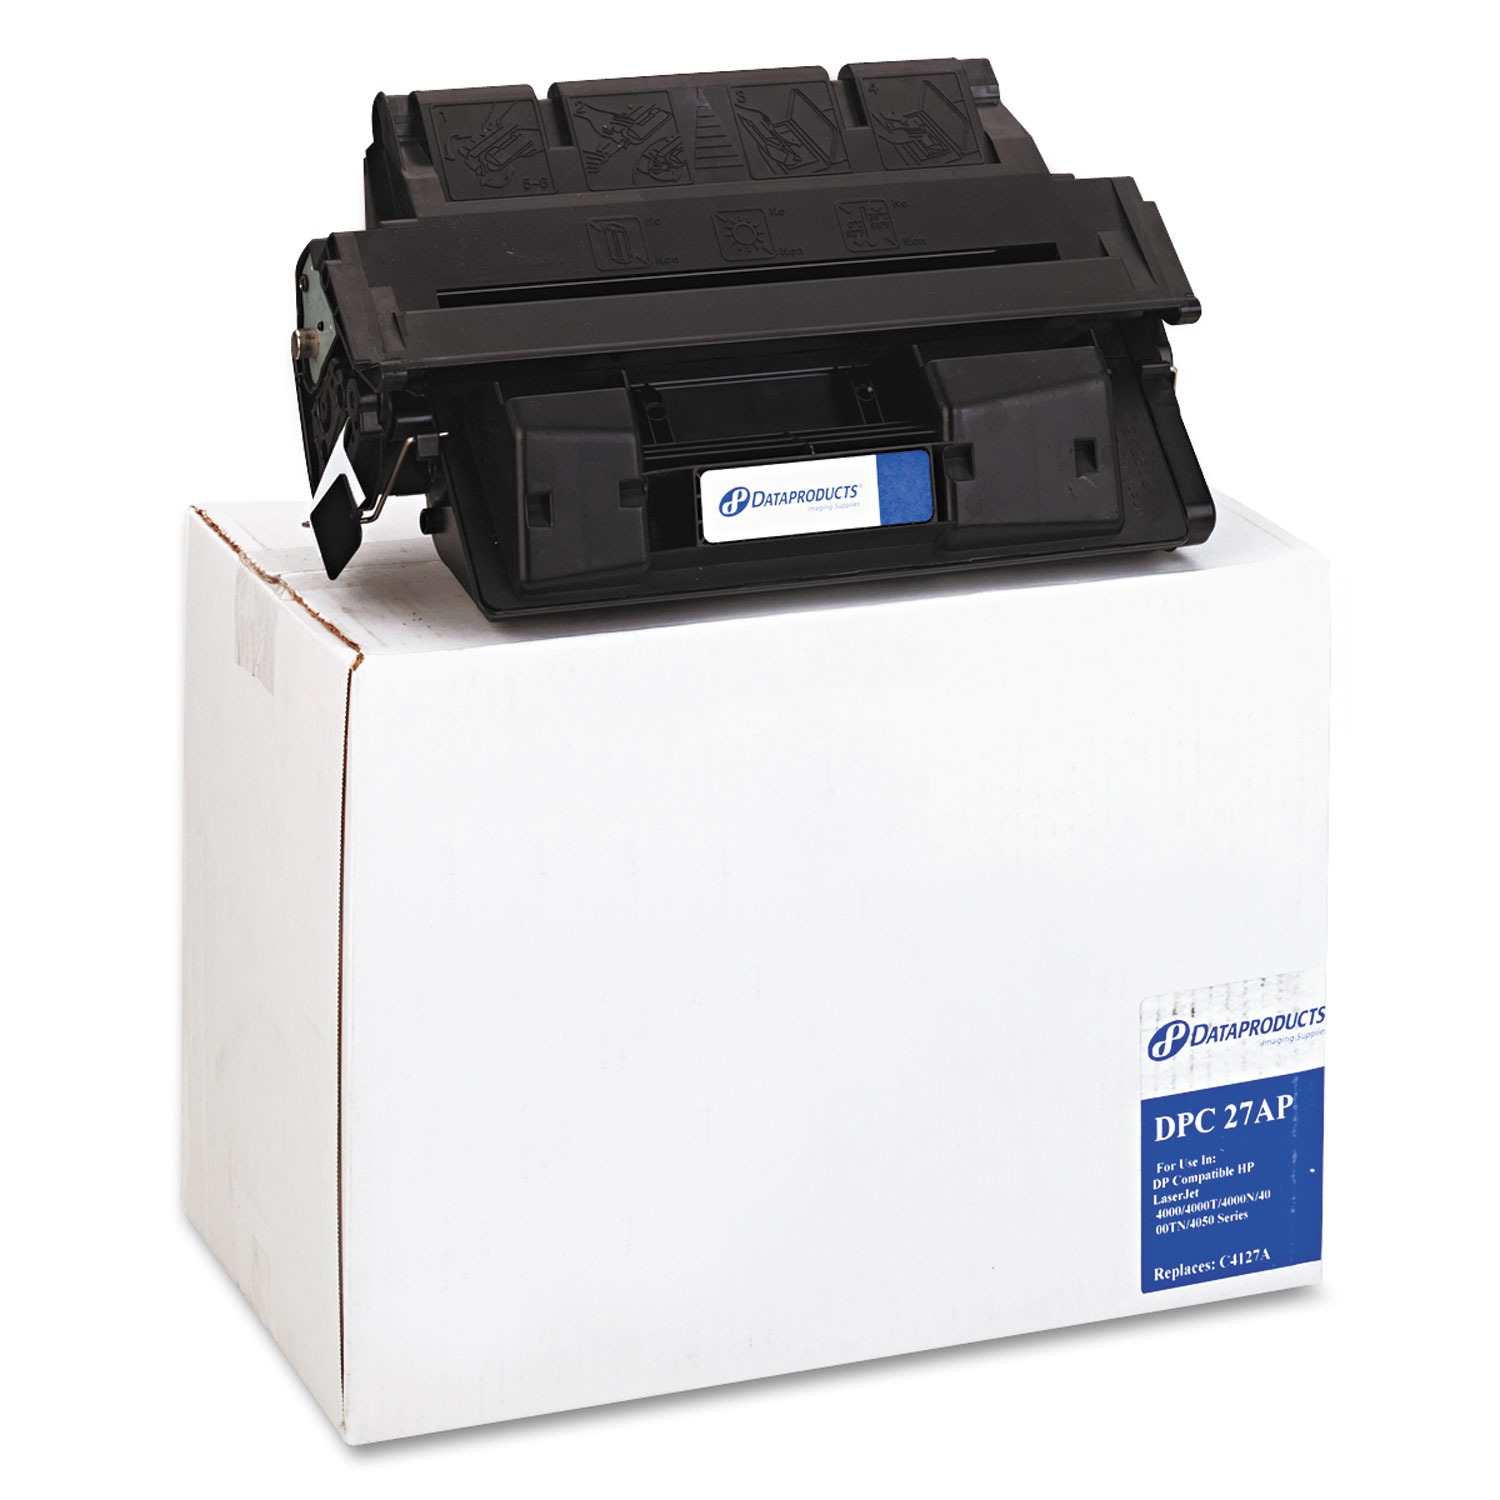 Remanufactured C4127A (27A) Toner, 6000 Page-Yield, Black